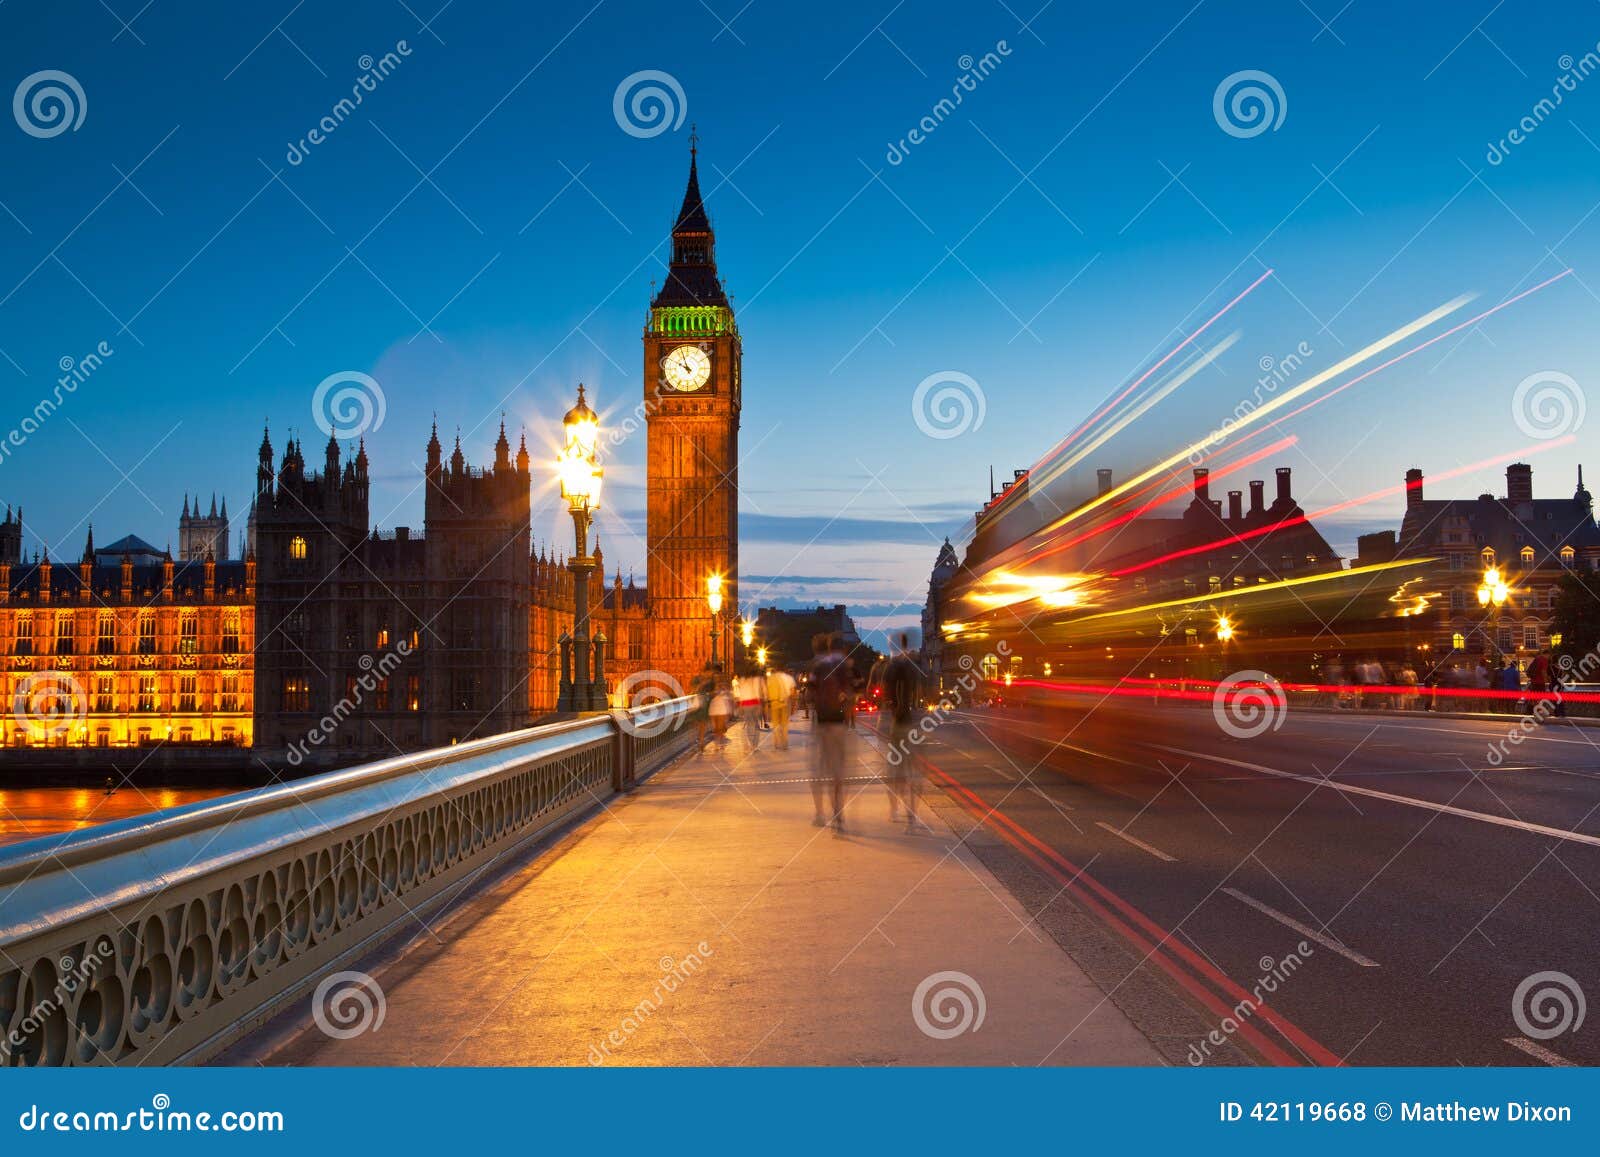 Big Ben, Westminster, Houses of Parliament, London Stock Photo - Image ...